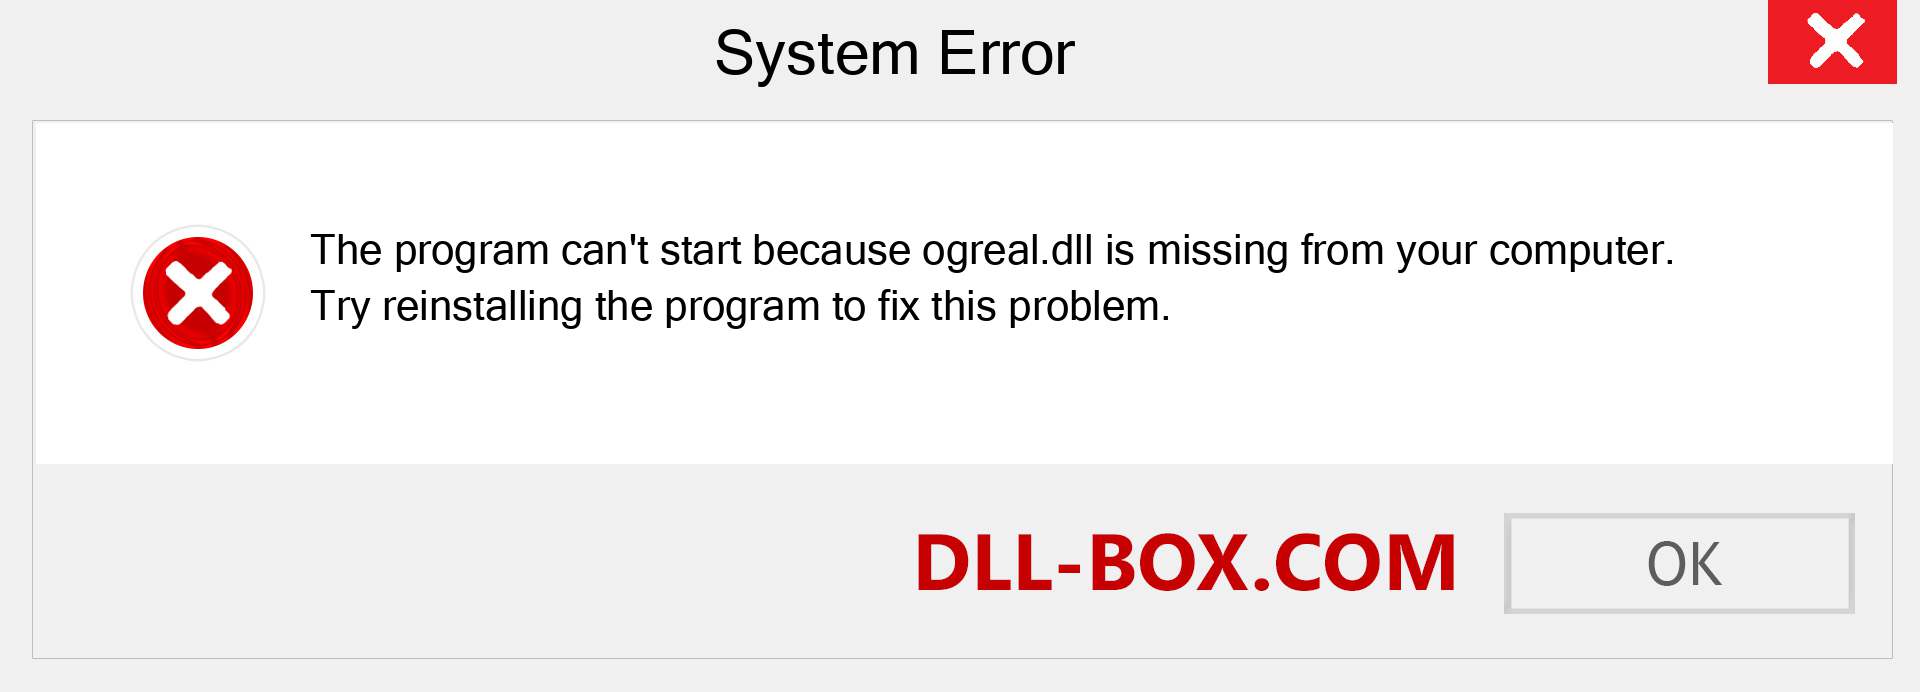  ogreal.dll file is missing?. Download for Windows 7, 8, 10 - Fix  ogreal dll Missing Error on Windows, photos, images